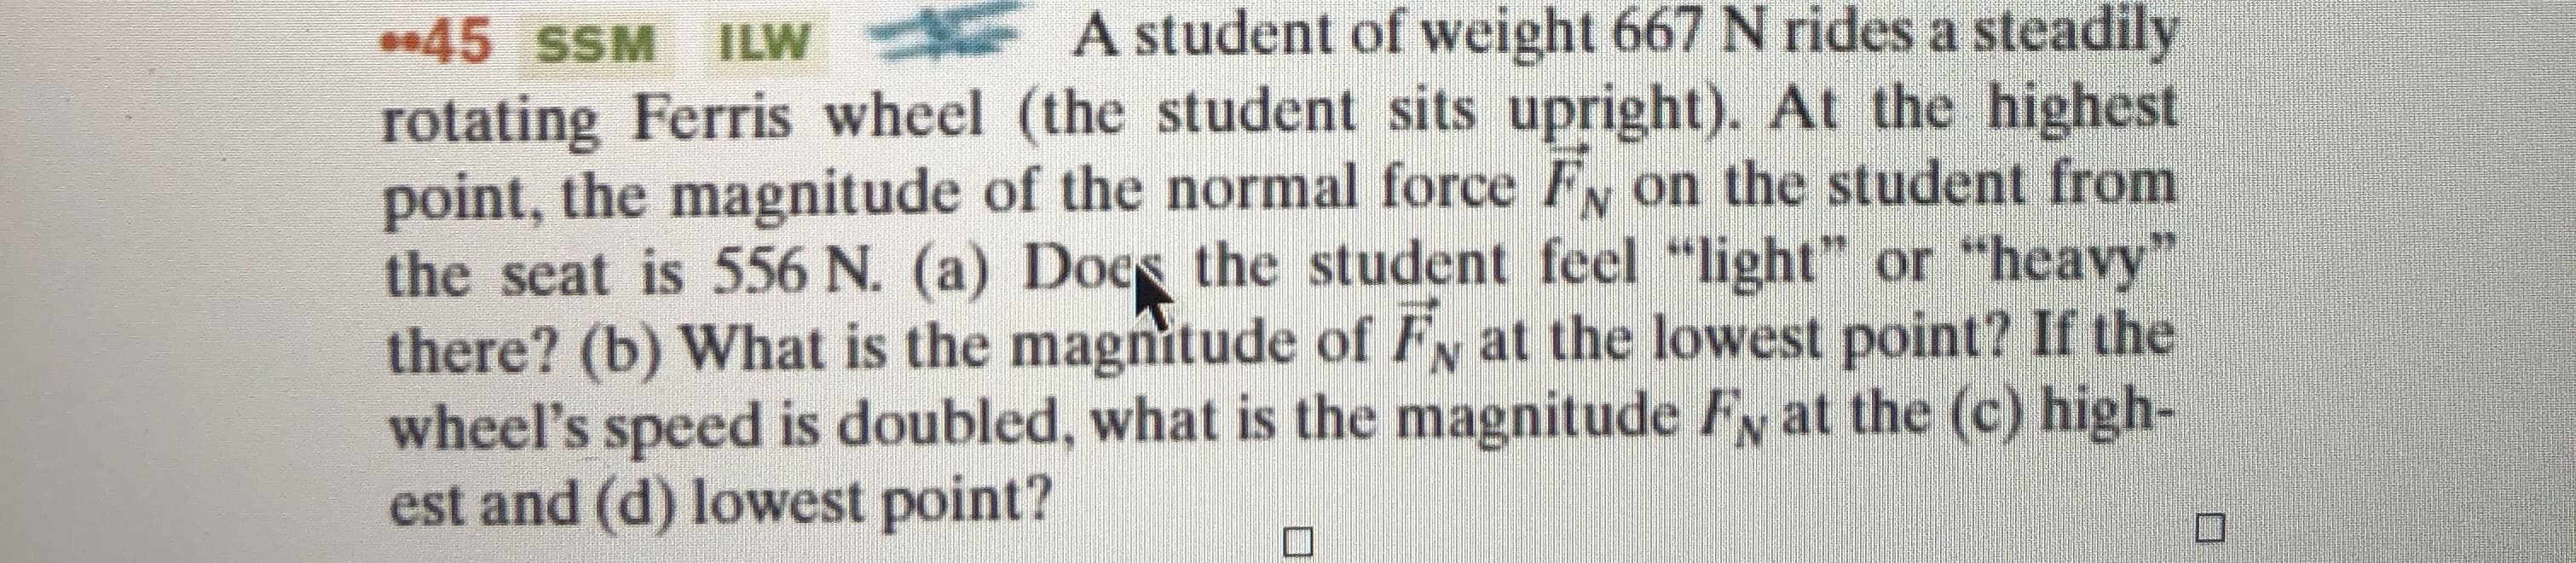 A student of weight 667 N rides a steadily
45 SSM ILW
rotating Ferris wheel (the student sits upright). At the highest
point, the magnitude of the normal force Fy on the student from
the seat is 556 N. (a) Does the student feel "light" or "heavy"
there? (b) What is the magnitude of Fy at the lowest point? If the
wheel's speed is doubled, what is the magnitude Fy at the (c) high-
est and (d) lowest point?
